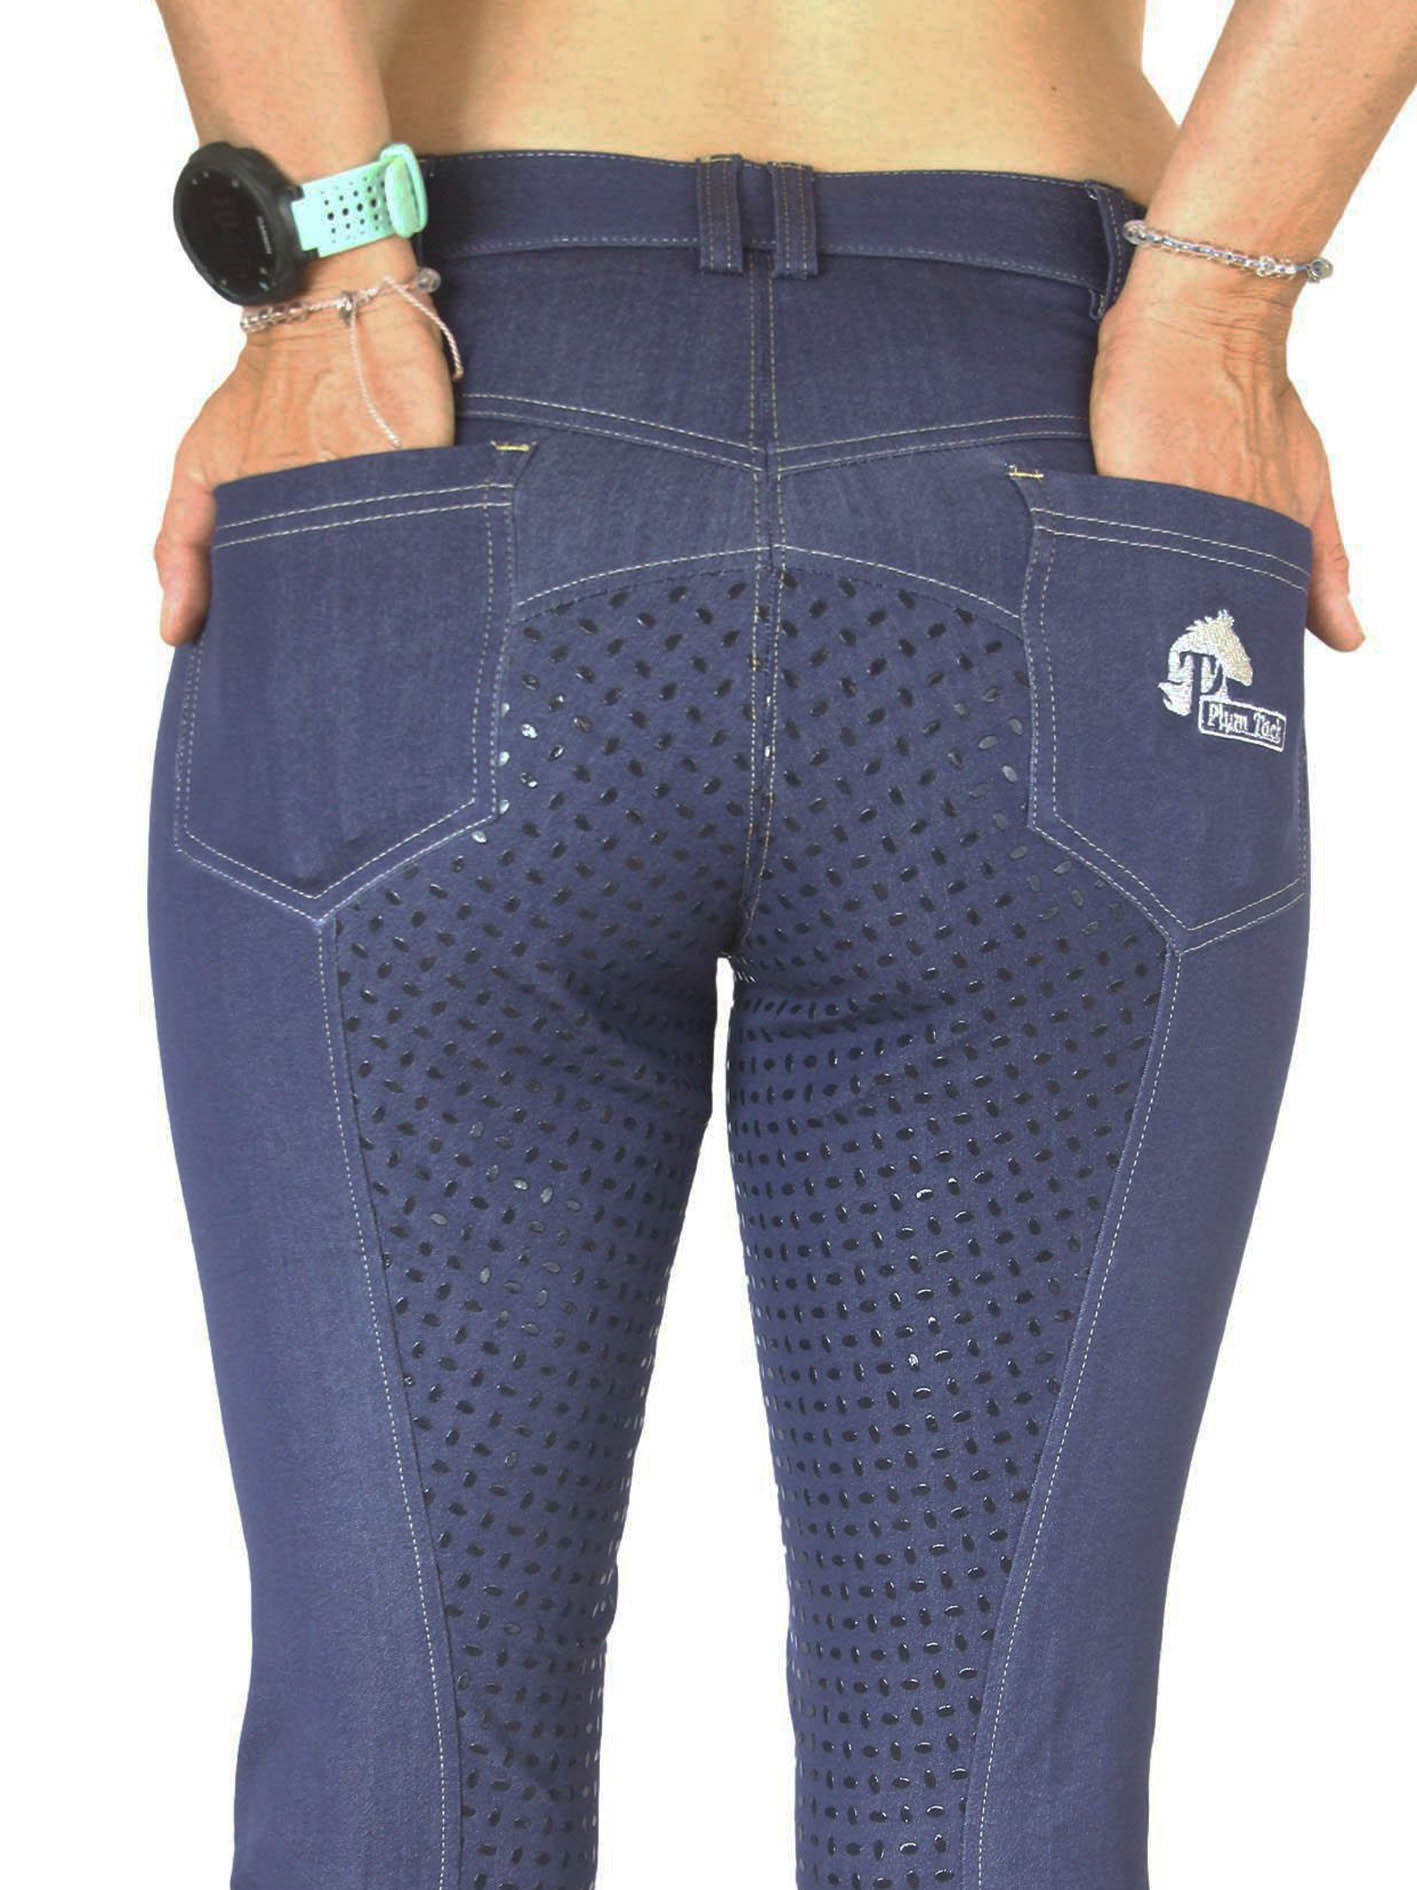 Denim Jodhpurs with Silicone seat Classic Jeans pockets-Plum Tack-The Equestrian